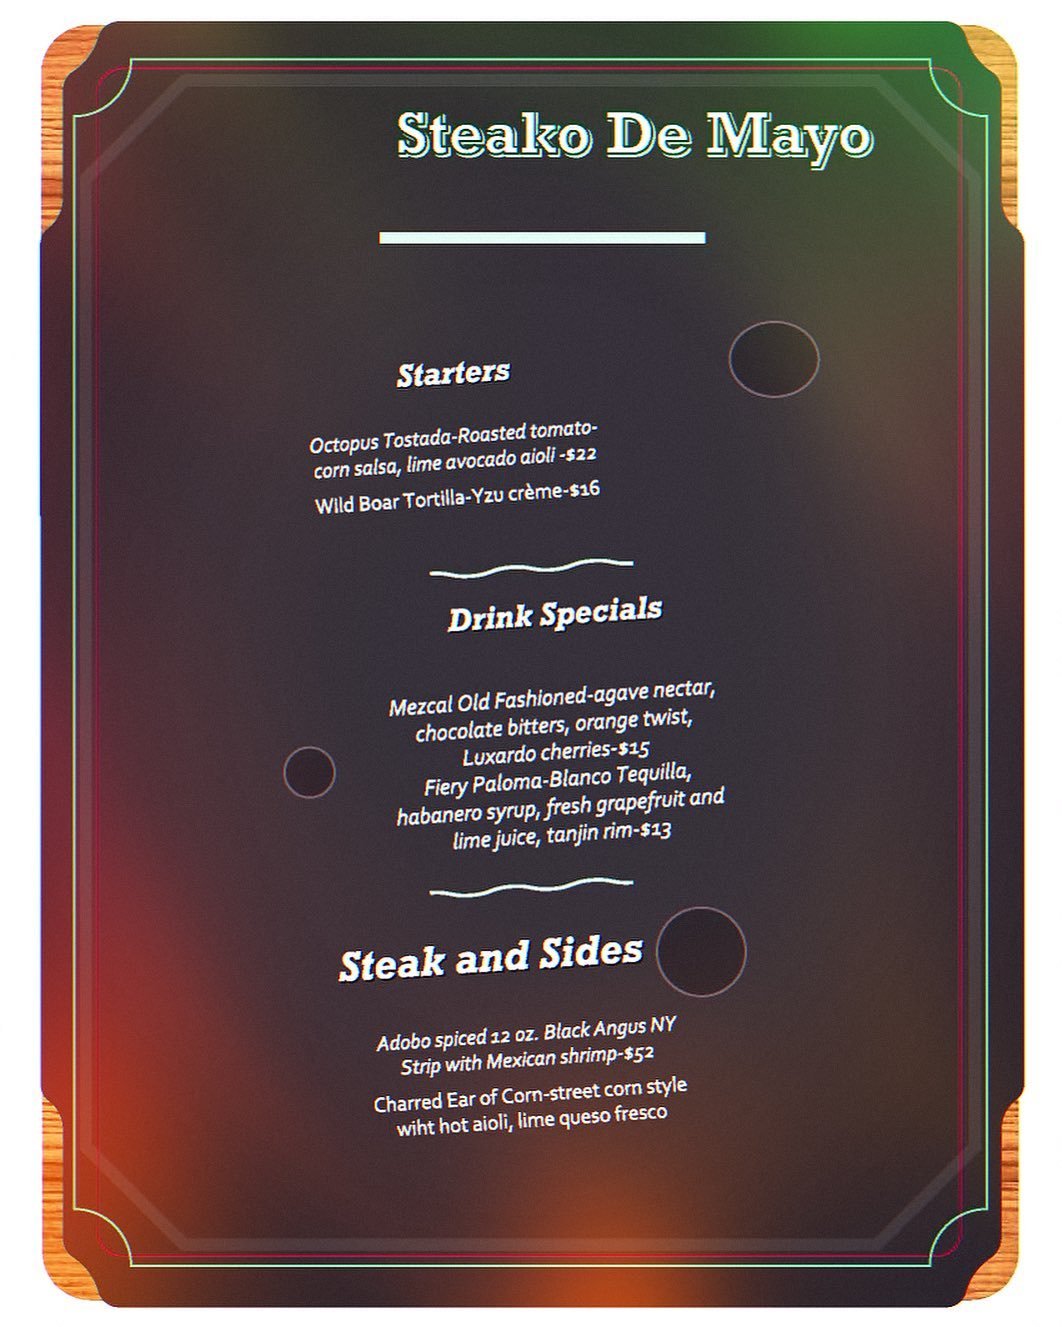 We have some great specials tonight!!! #cincodemayo #steakhouse #chaddsford #brandywineprime